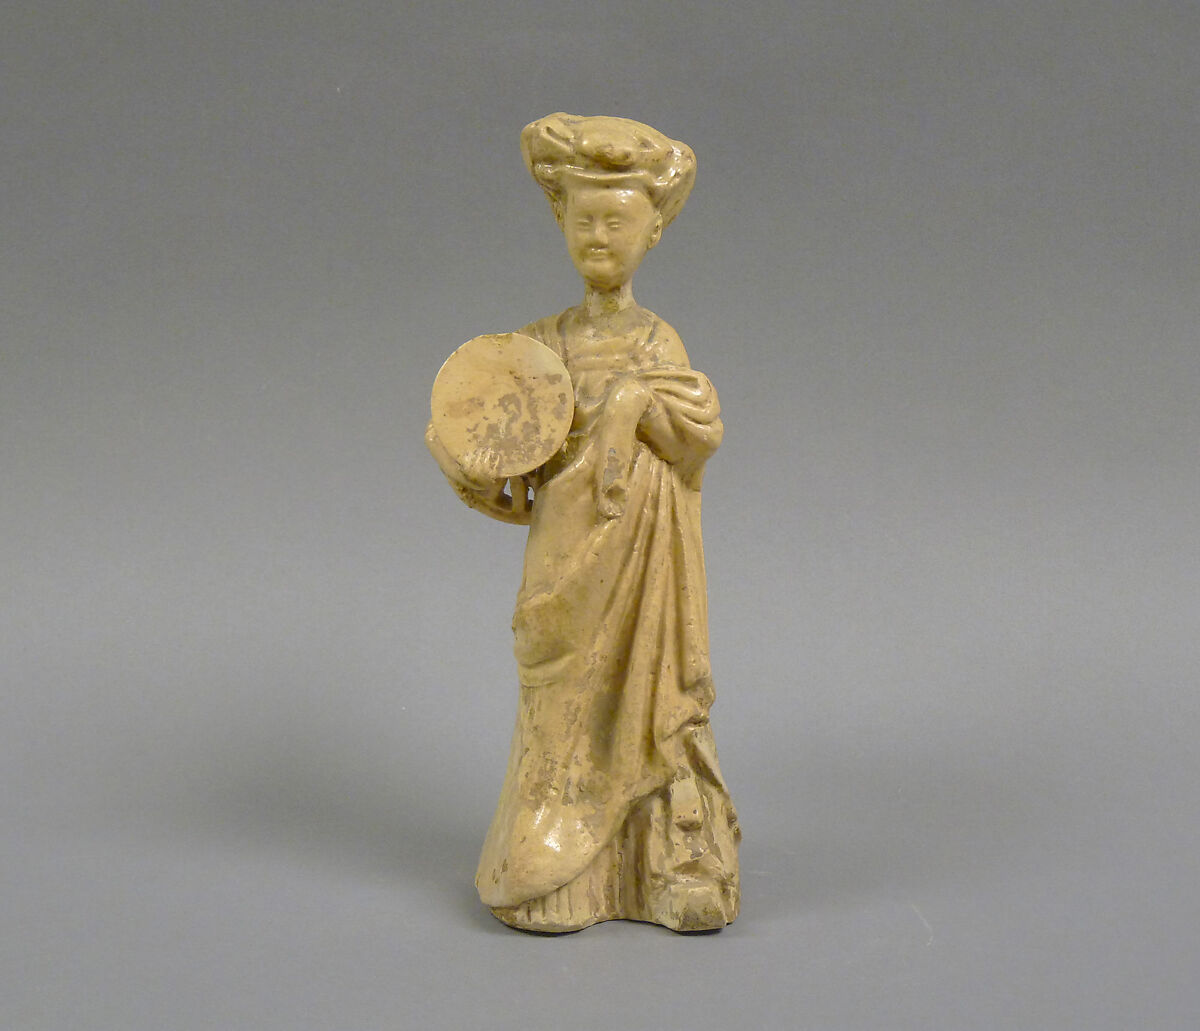 Female attendant carrying a stool, Glazed earthenware, China 